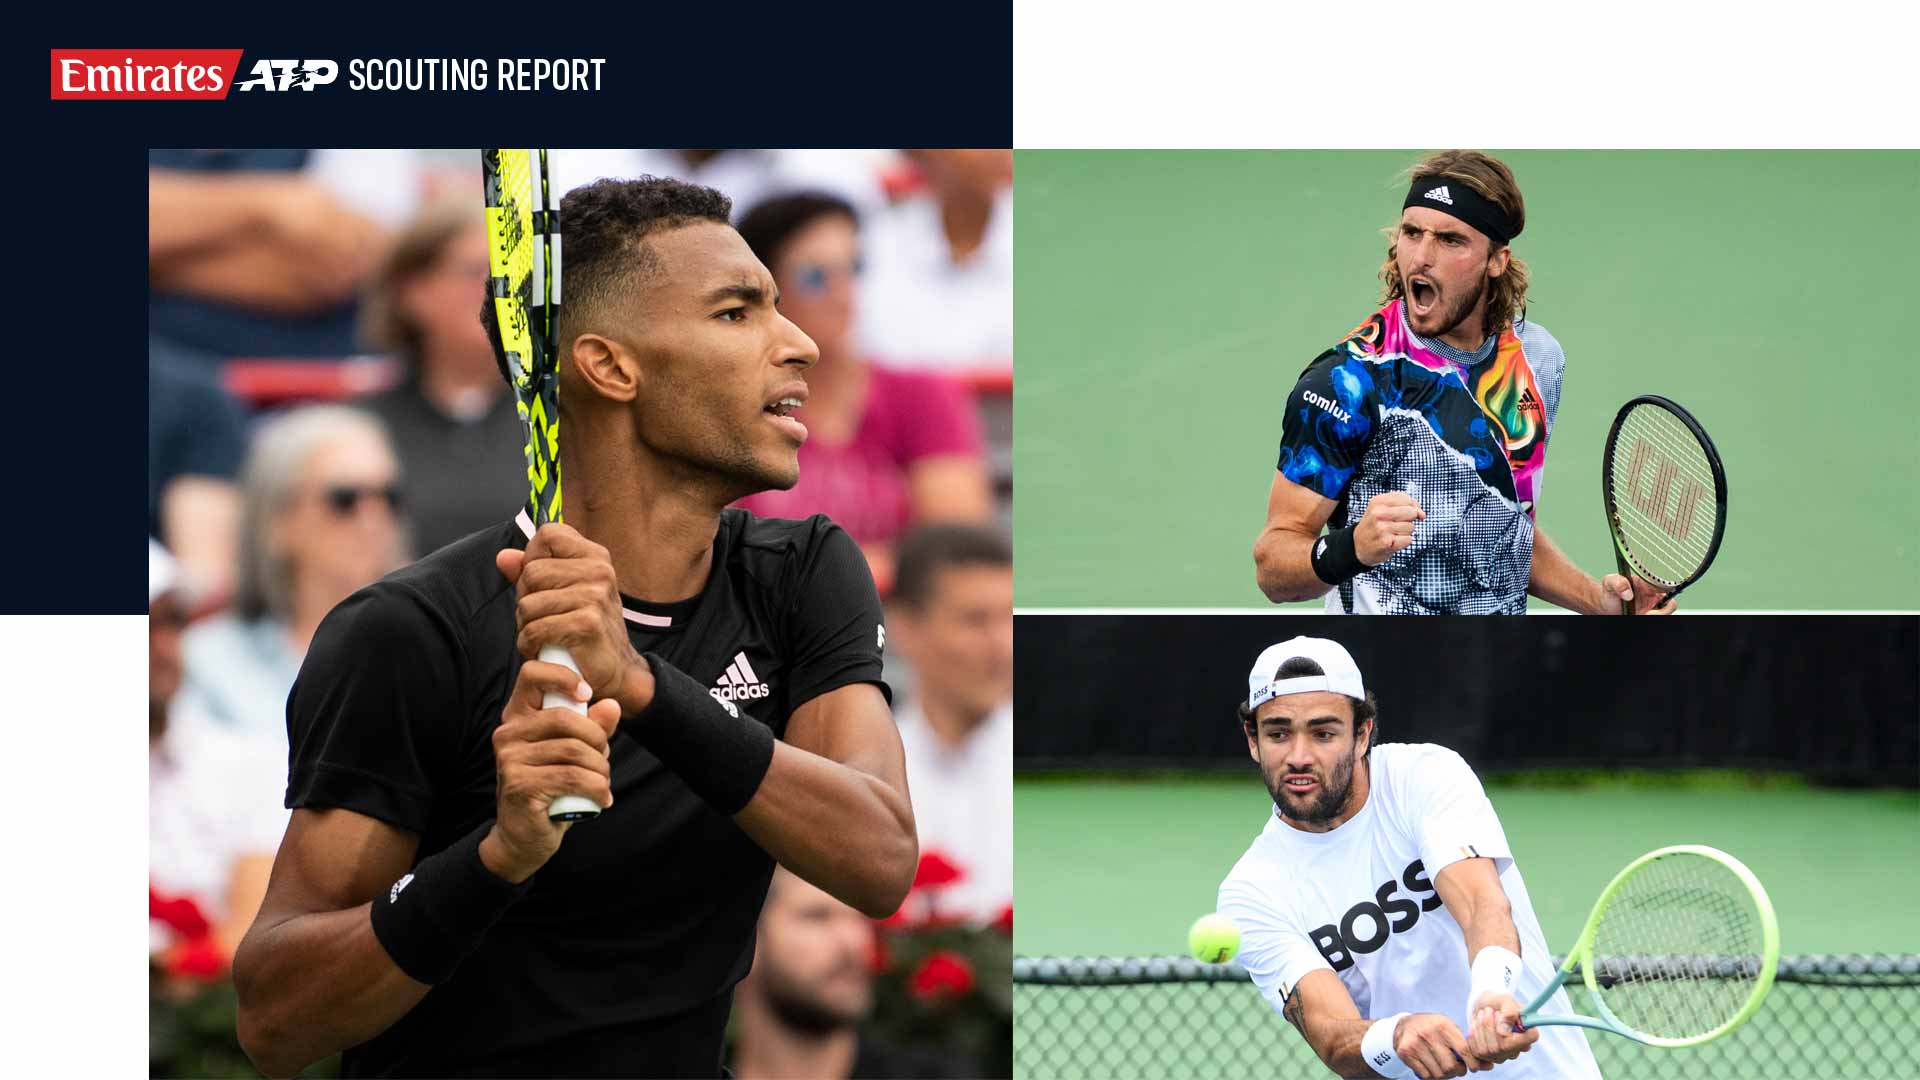 Felix Auger-Aliassime, Stefanos Tsitsipas and Matteo Berrettini will be in action this week.